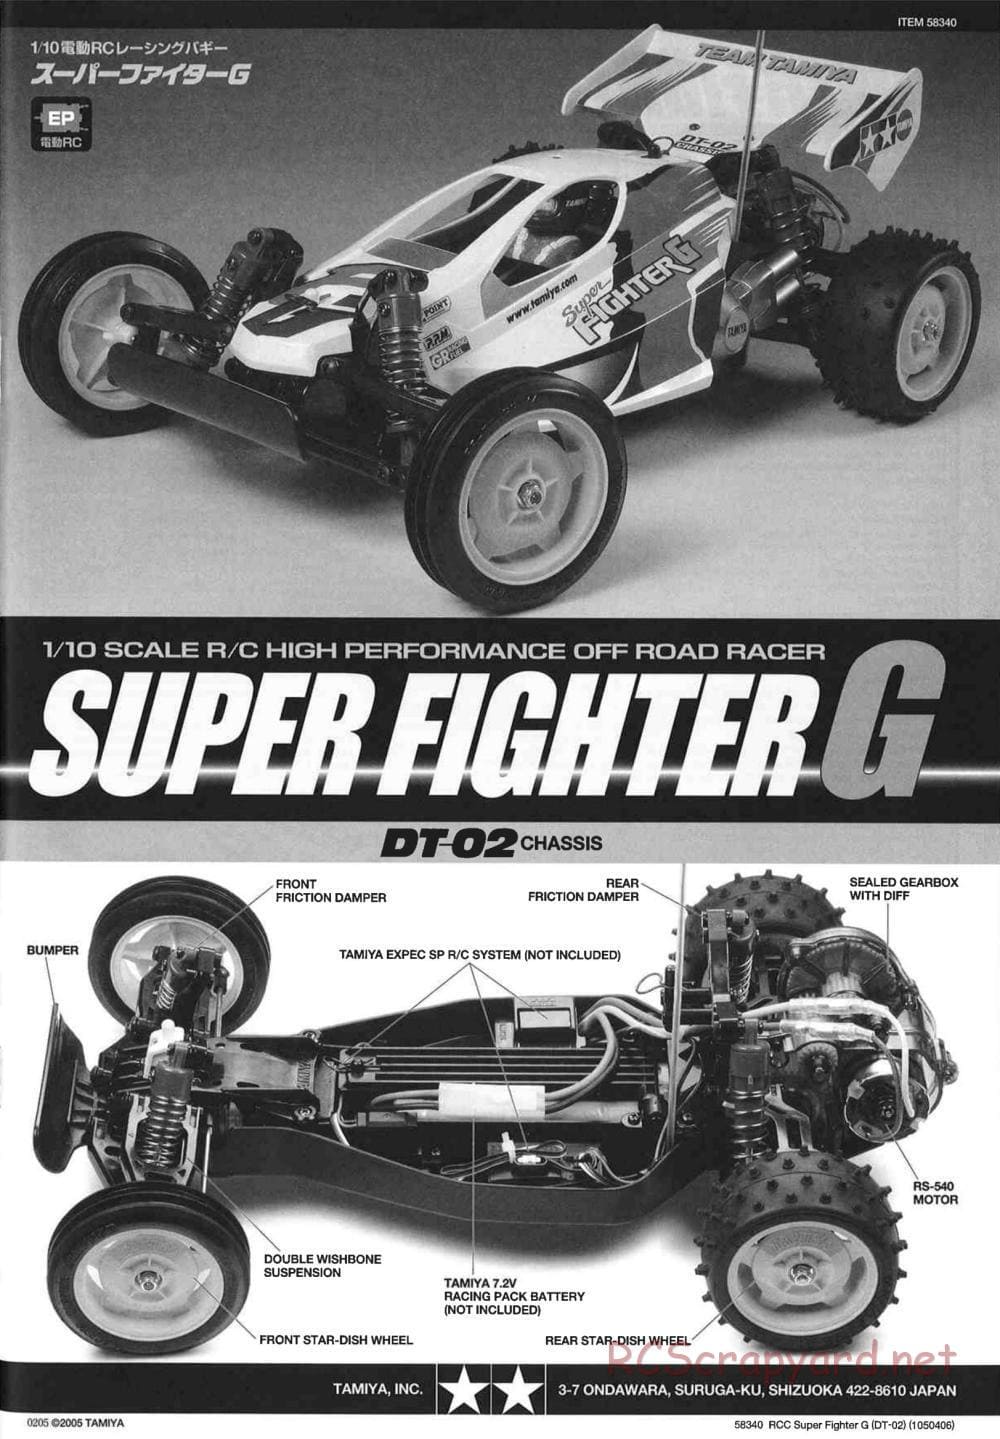 Tamiya - Super Fighter G Chassis - Manual - Page 1